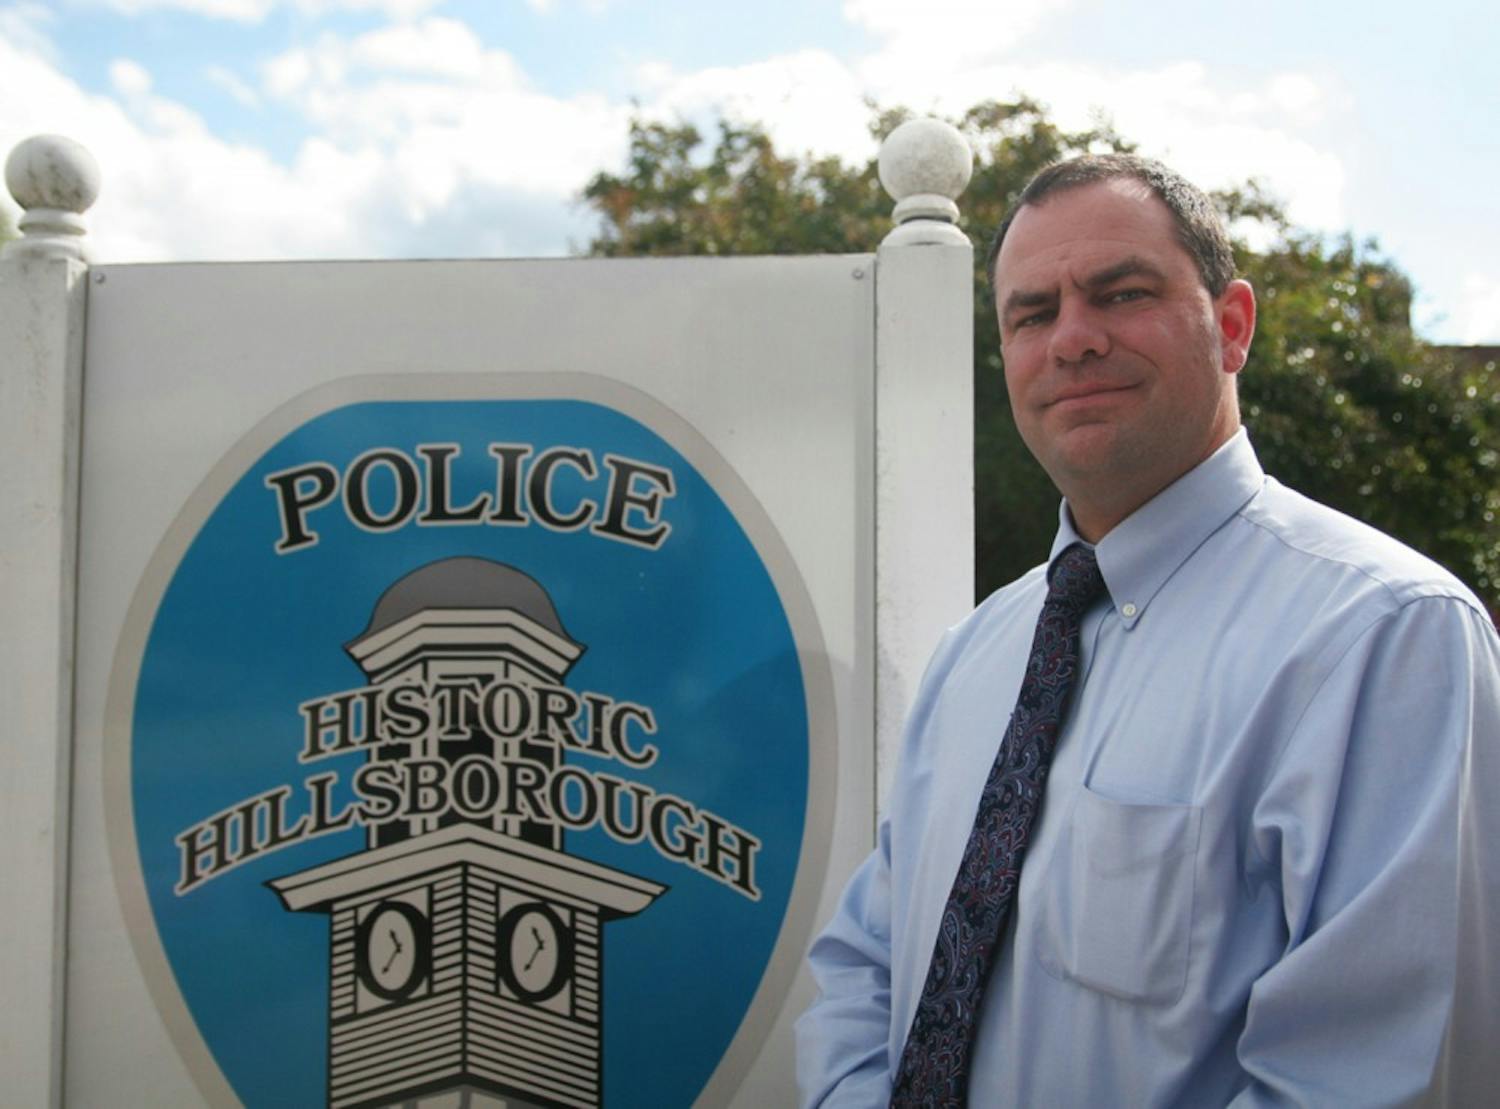 Duane Hampton, currently a lieutenant with the Durham Police Department, will become the chief of police for the town of Hillsborough on Nov. 1.